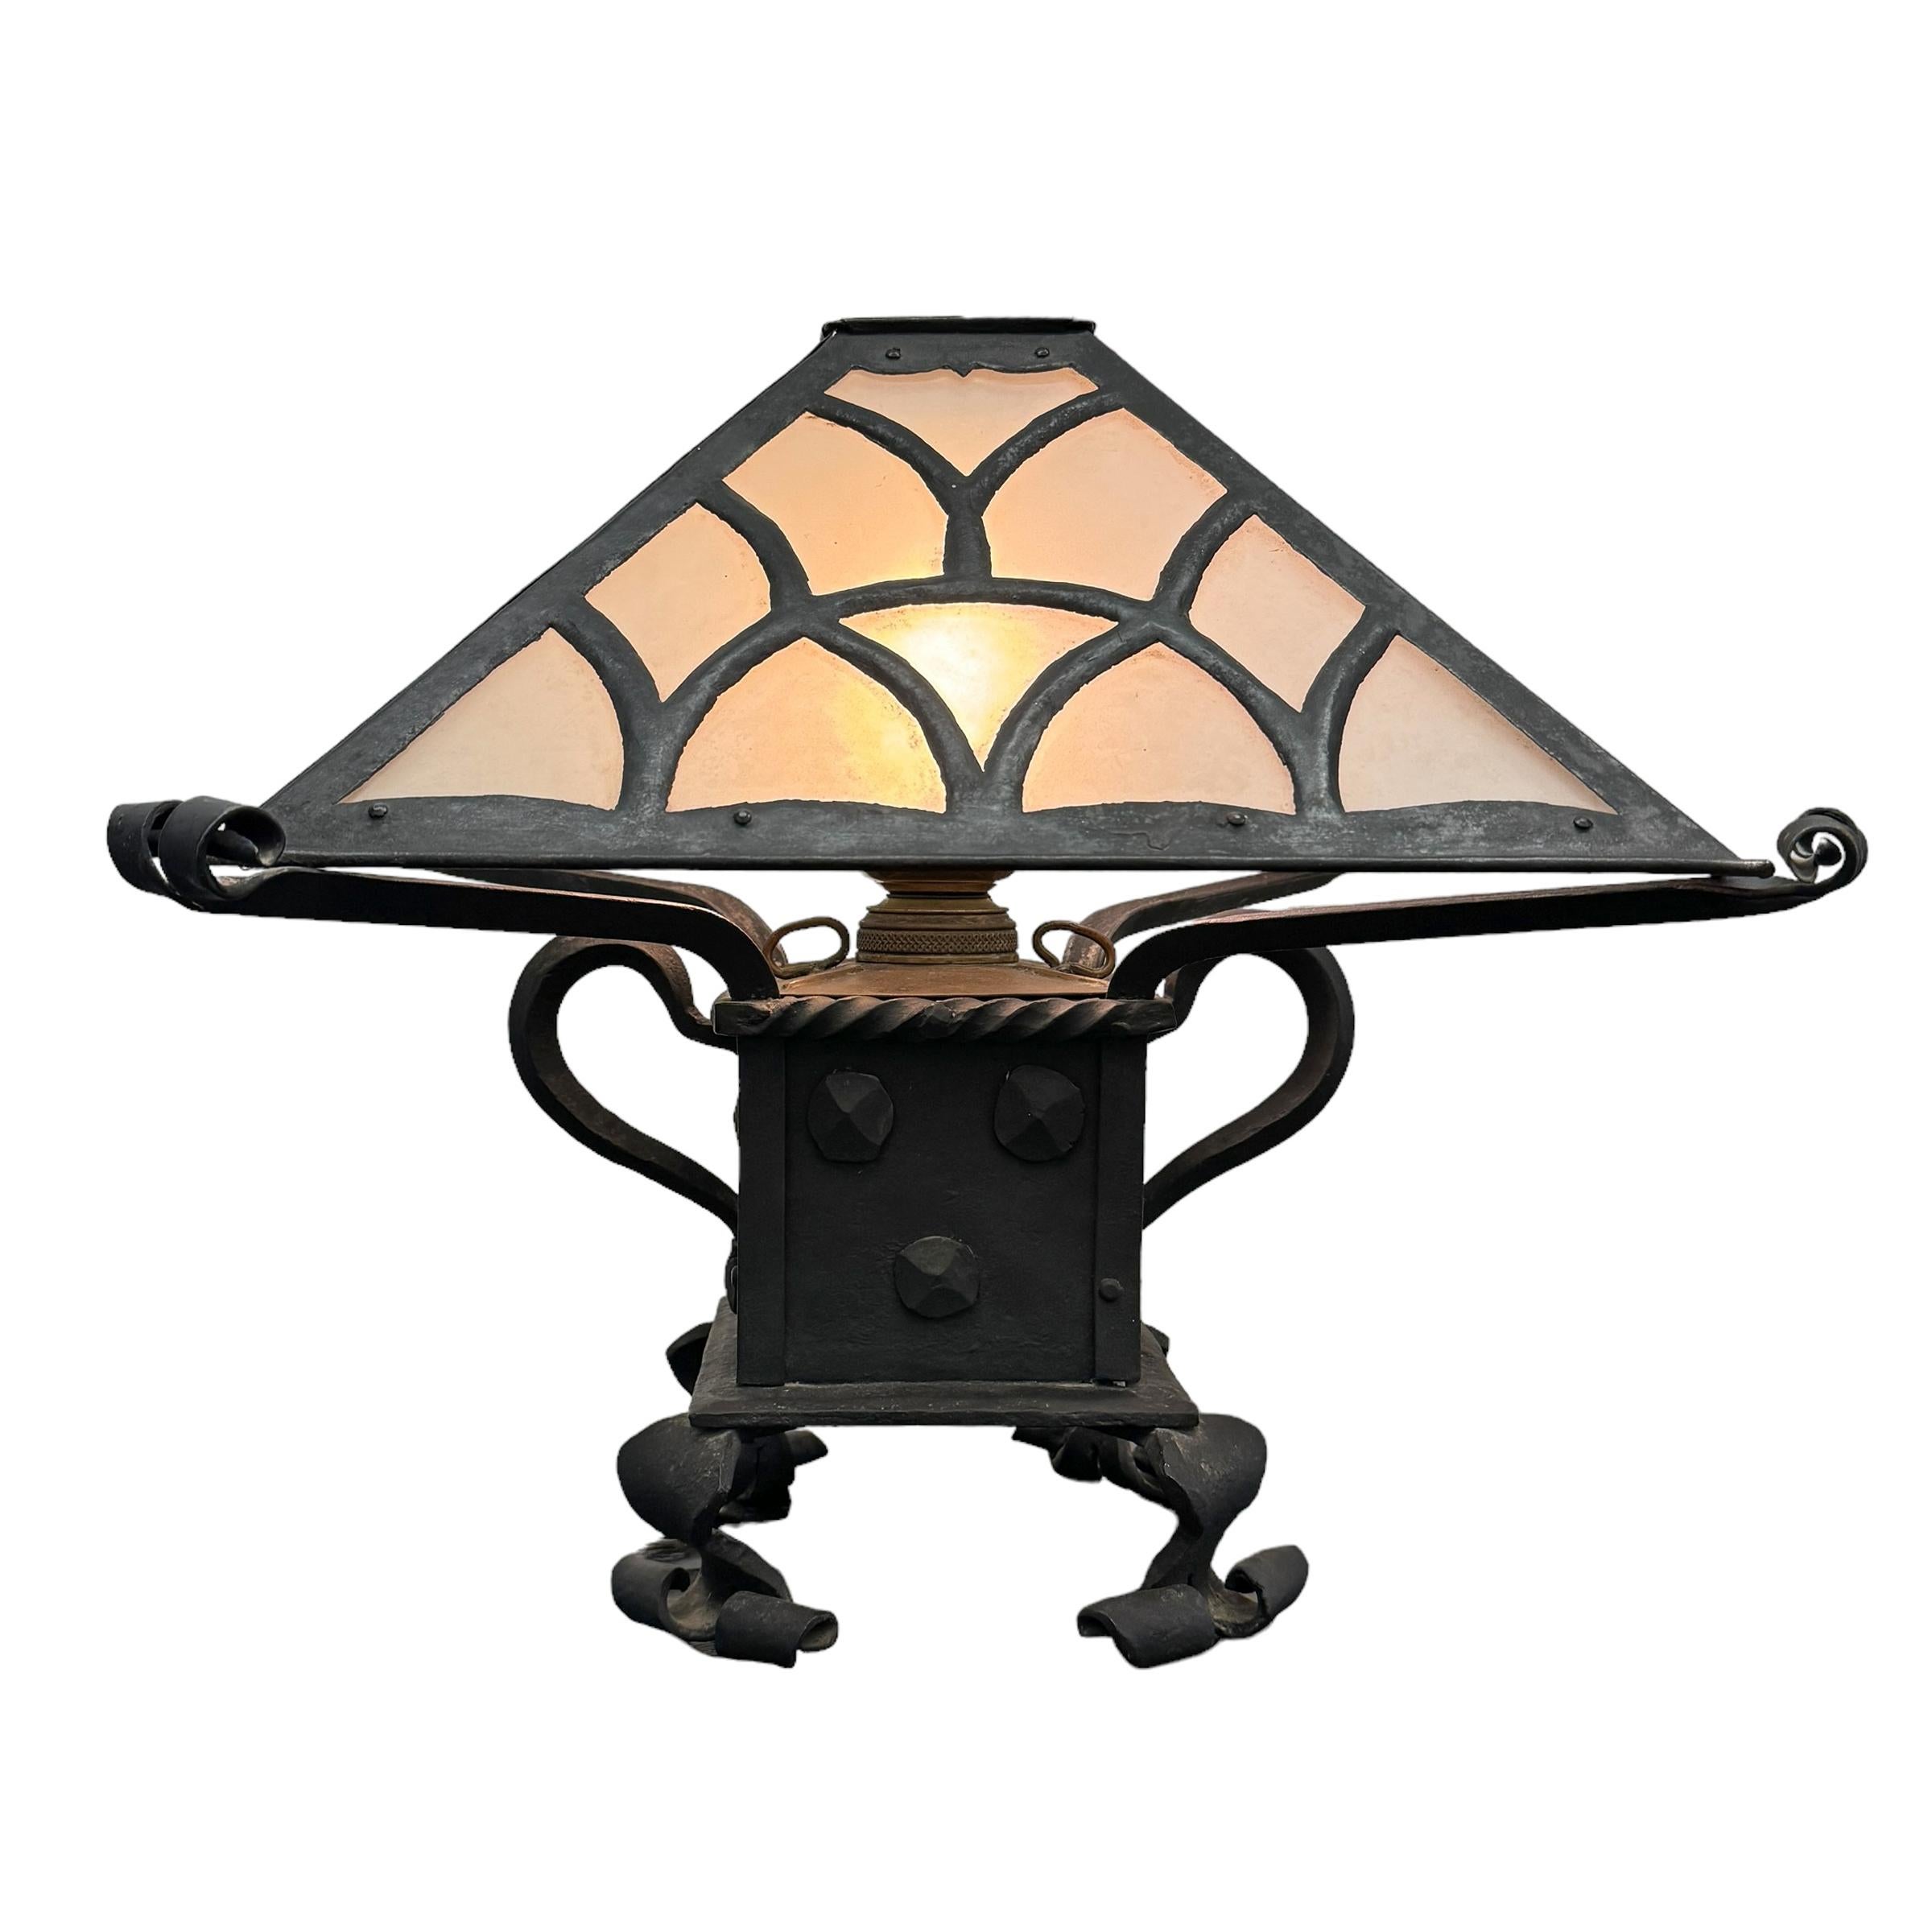 Late 19th/Early 20th Century American Arts and Crafts Wrought Iron Lamp In Good Condition For Sale In Chicago, IL